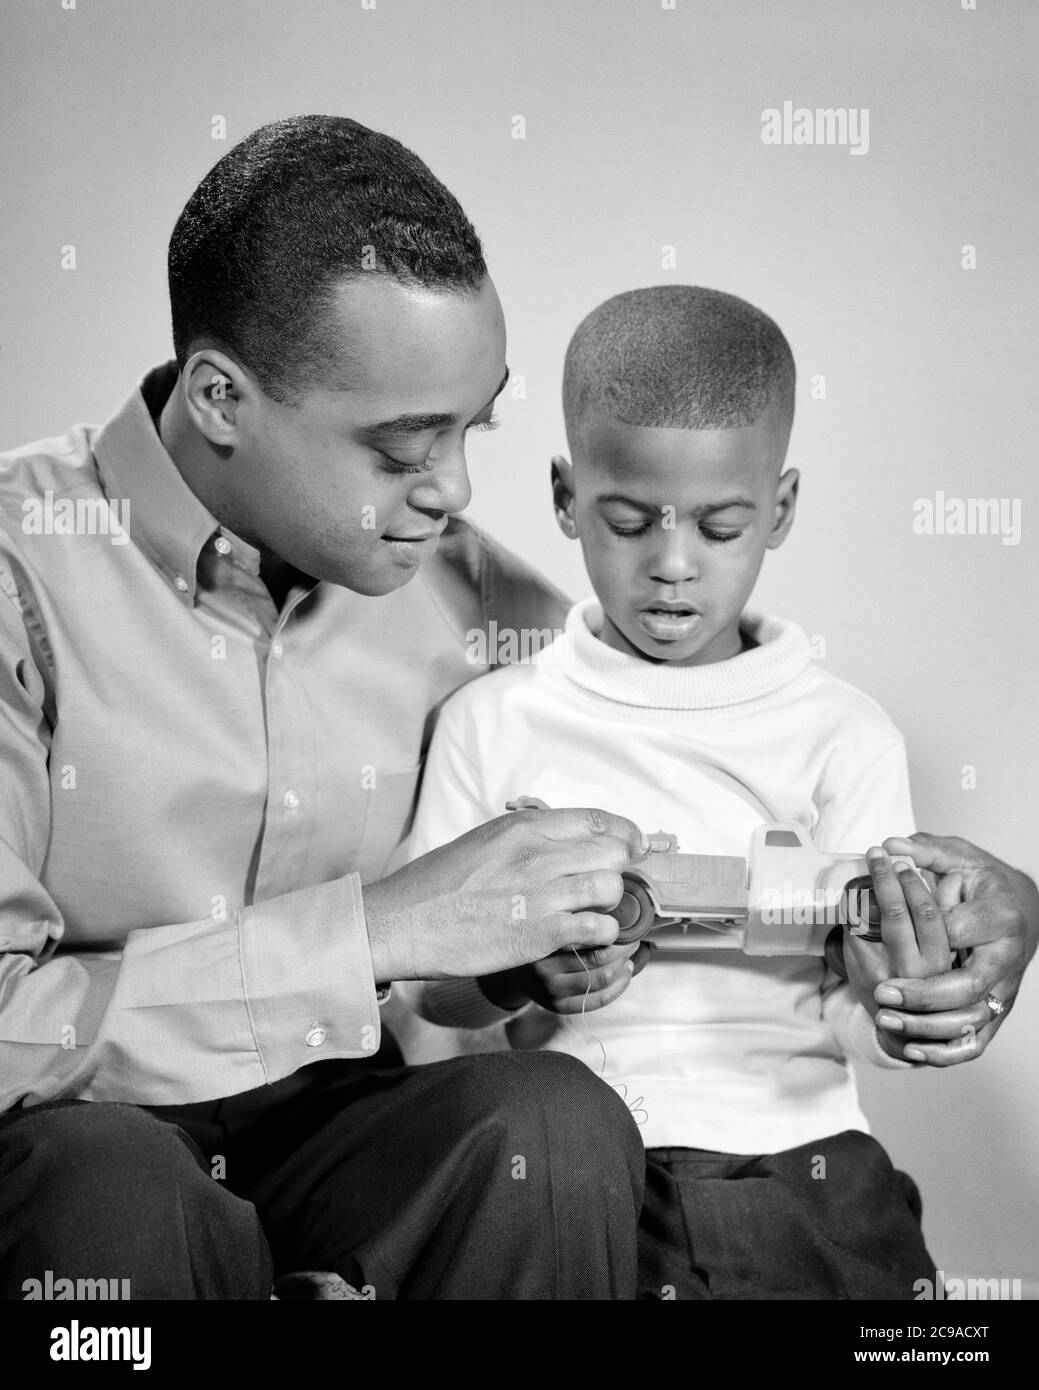 1960s AFRICAN-AMERICAN MAN FATHER WITH SON SITTING SIDE-BY-SIDE HOLDING TOY CAR - n2230 HAR001 HARS COMMUNICATION YOUNG ADULT TEAMWORK SONS FAMILIES JOY LIFESTYLE SATISFACTION STUDIO SHOT HOME LIFE COPY SPACE FRIENDSHIP HALF-LENGTH PERSONS INSPIRATION MALES FATHERS B&W HAPPINESS DISCOVERY EXPLAINING HIS AFRICAN-AMERICANS AFRICAN-AMERICAN DADS BLACK ETHNICITY SUPPORT GROWTH JUVENILES SIDE-BY-SIDE TOGETHERNESS YOUNG ADULT MAN BLACK AND WHITE HAR001 OLD FASHIONED AFRICAN AMERICANS Stock Photo